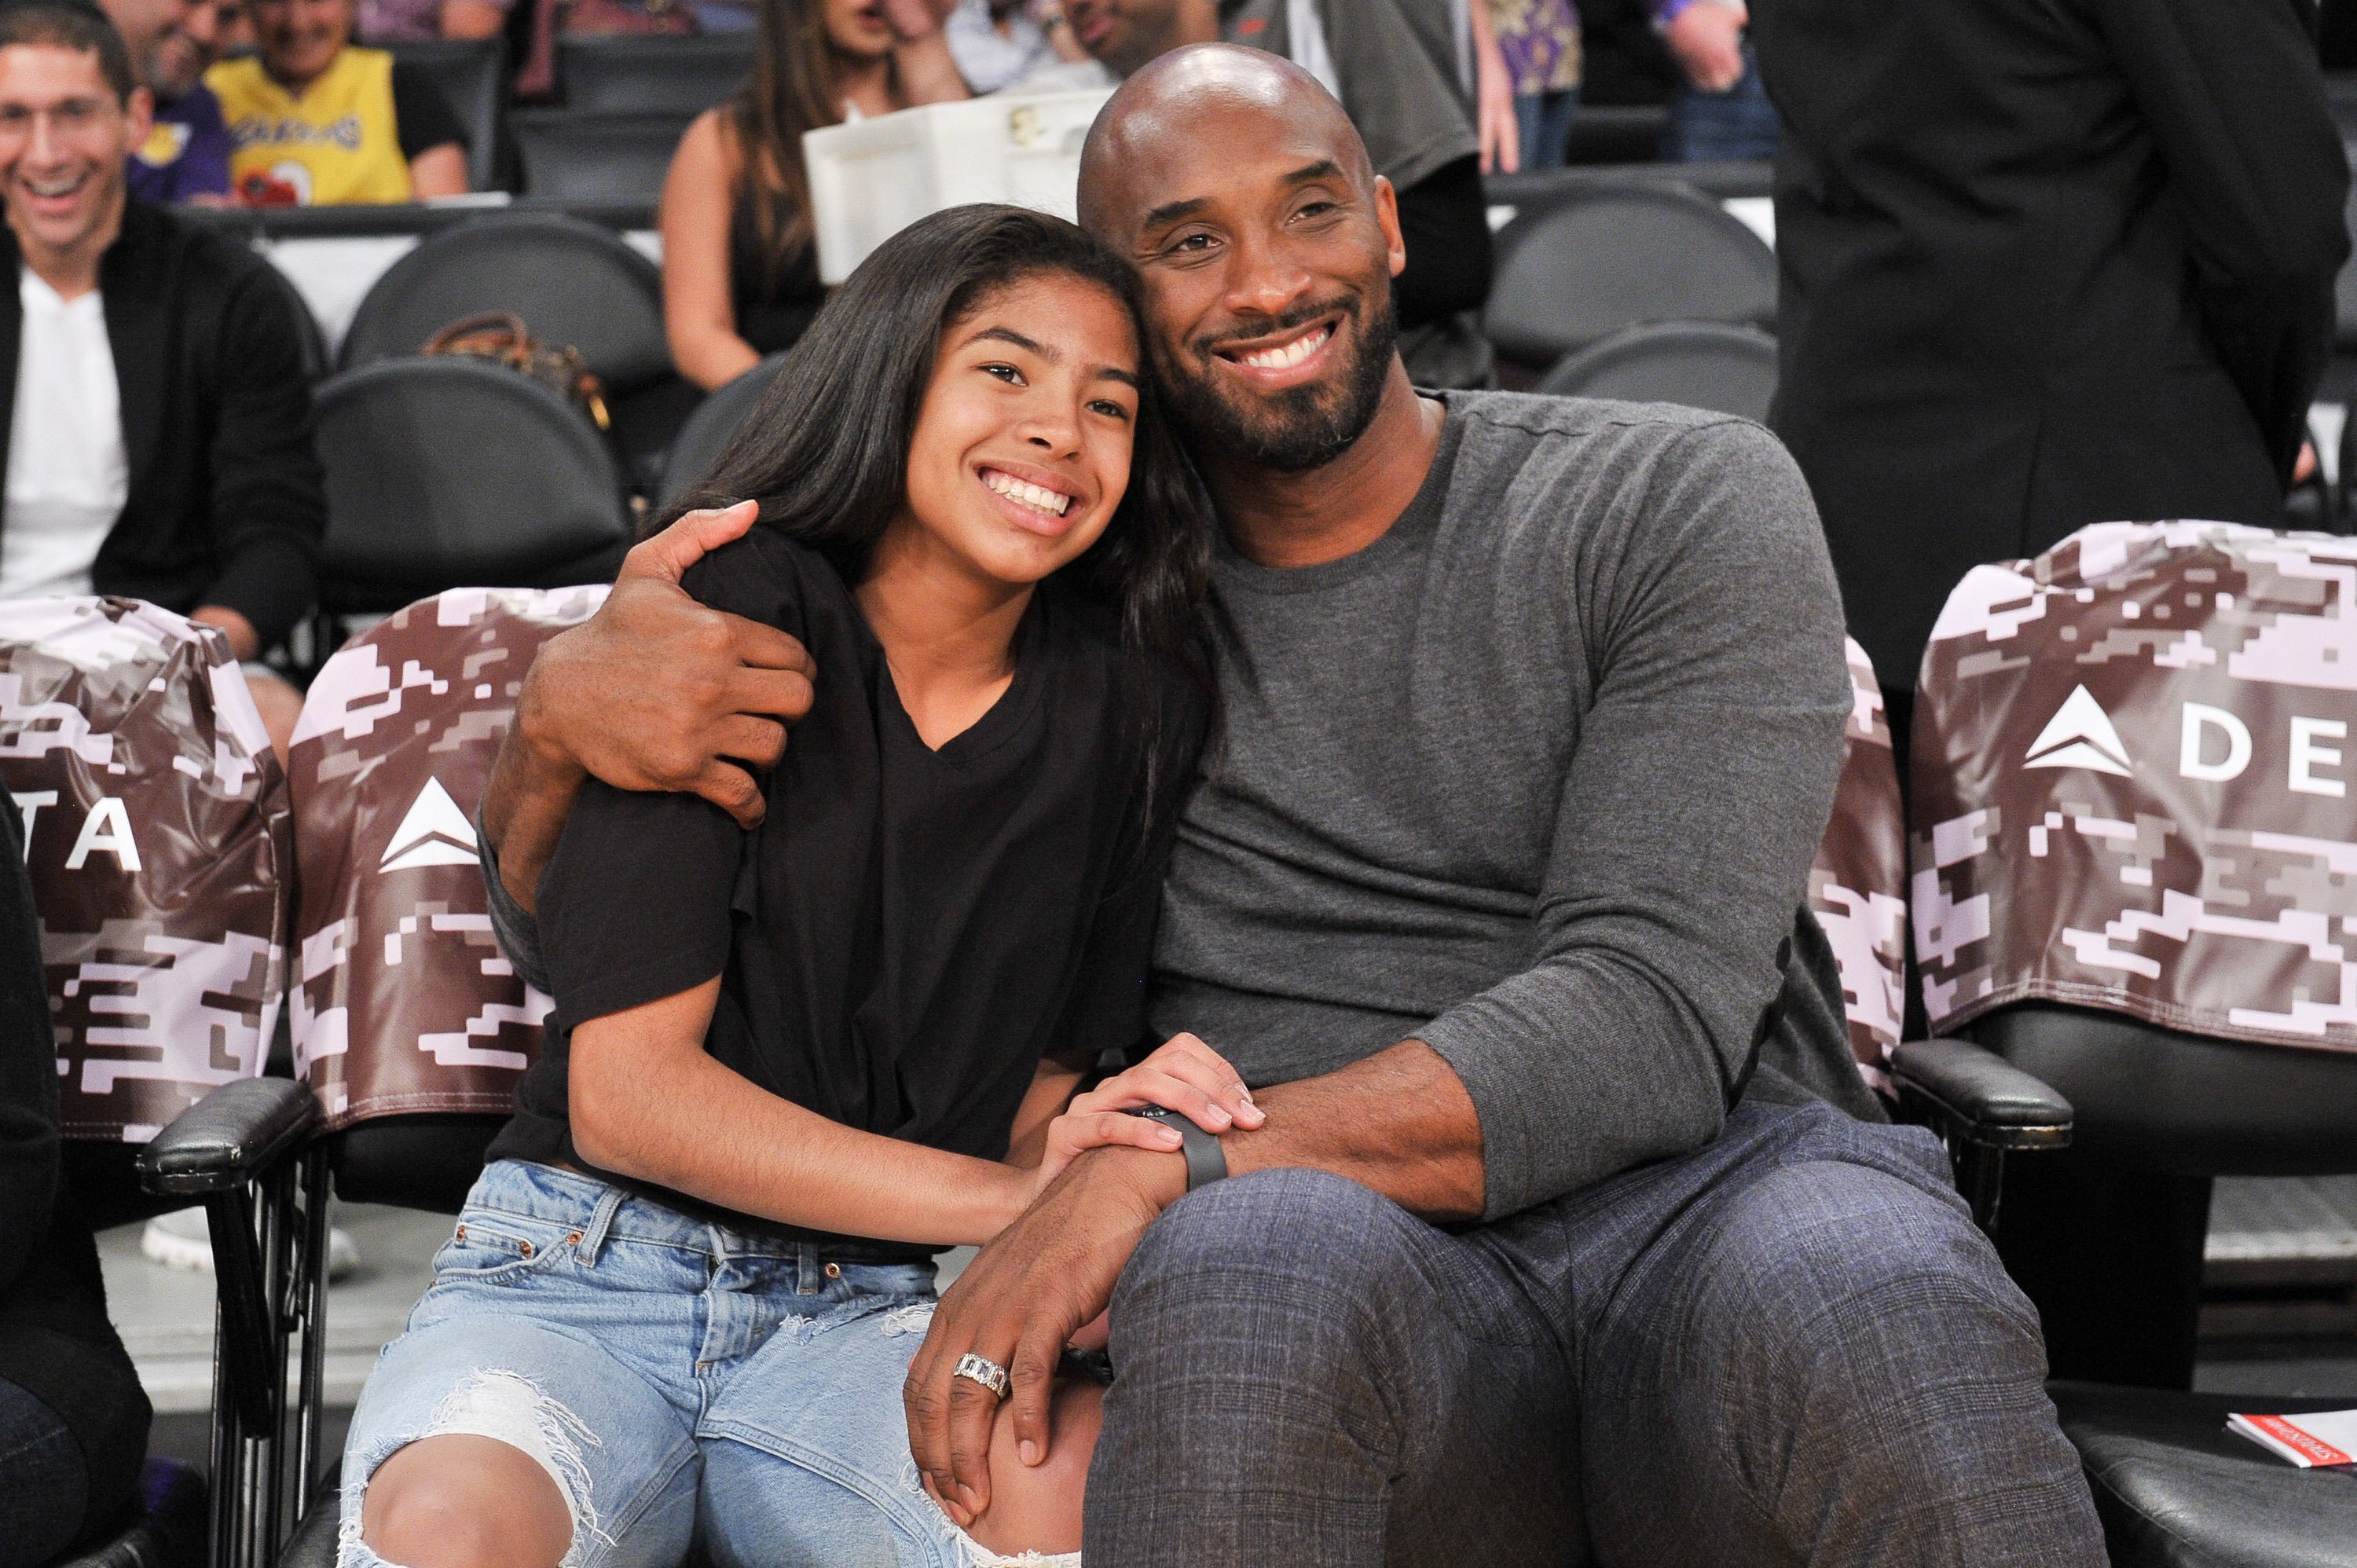 Kobe and Gianna Bryant at a Los Angeles Lakers and Atlanta Hawks basketball game at Staples Center on November 17, 2019 in Los Angeles, California. | Source: Getty Images